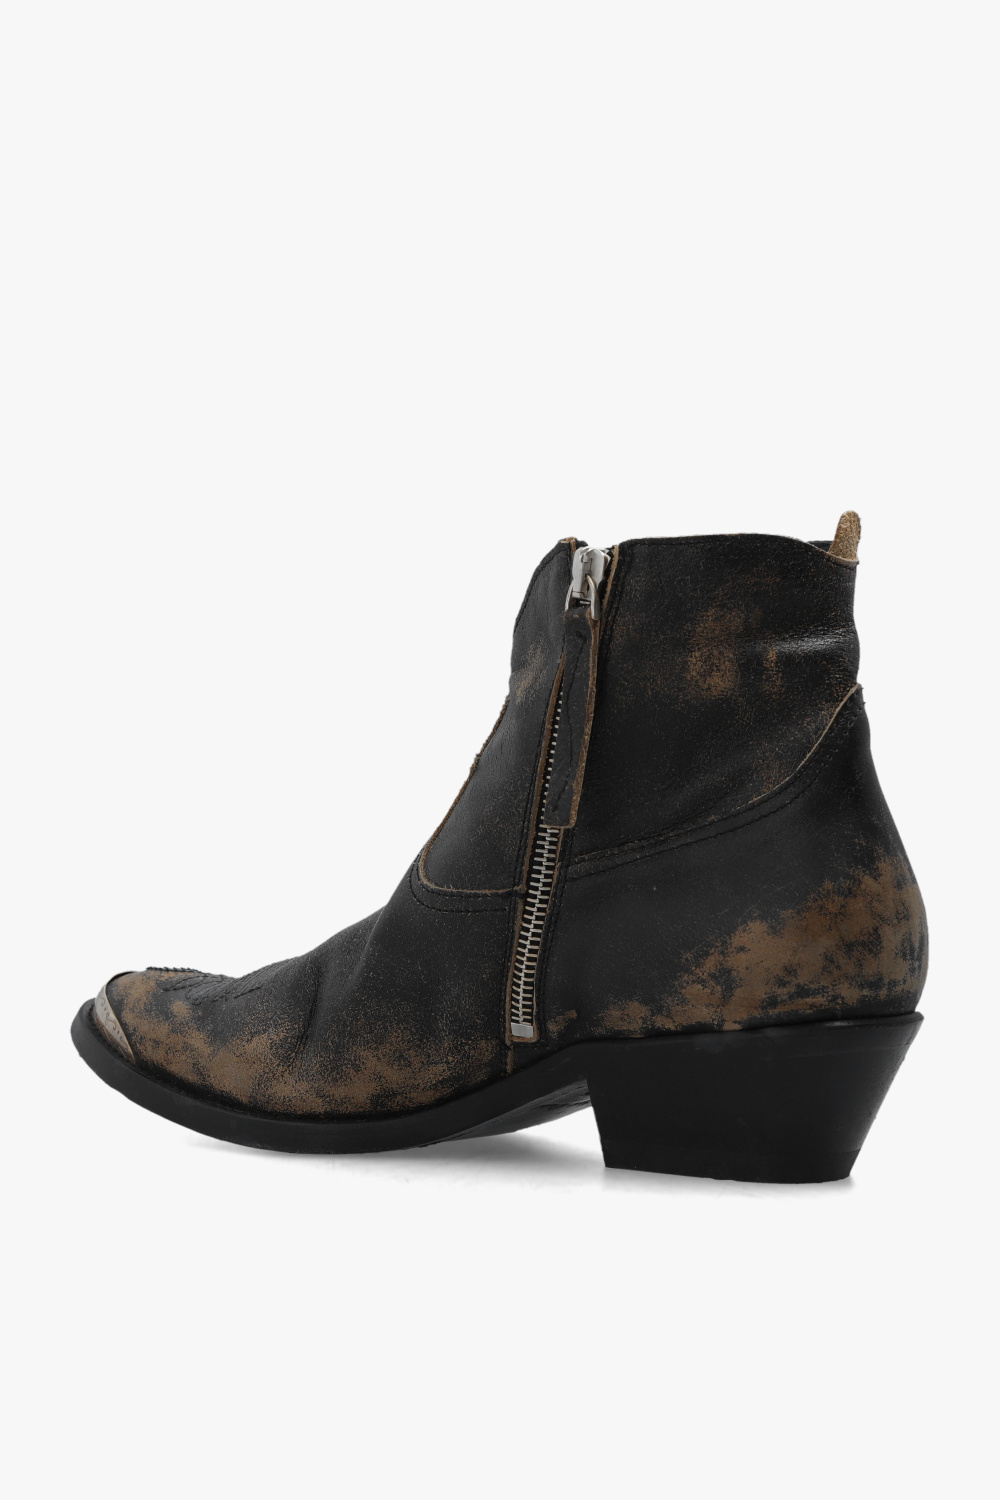 Golden Goose ‘Young’ heeled ankle boots